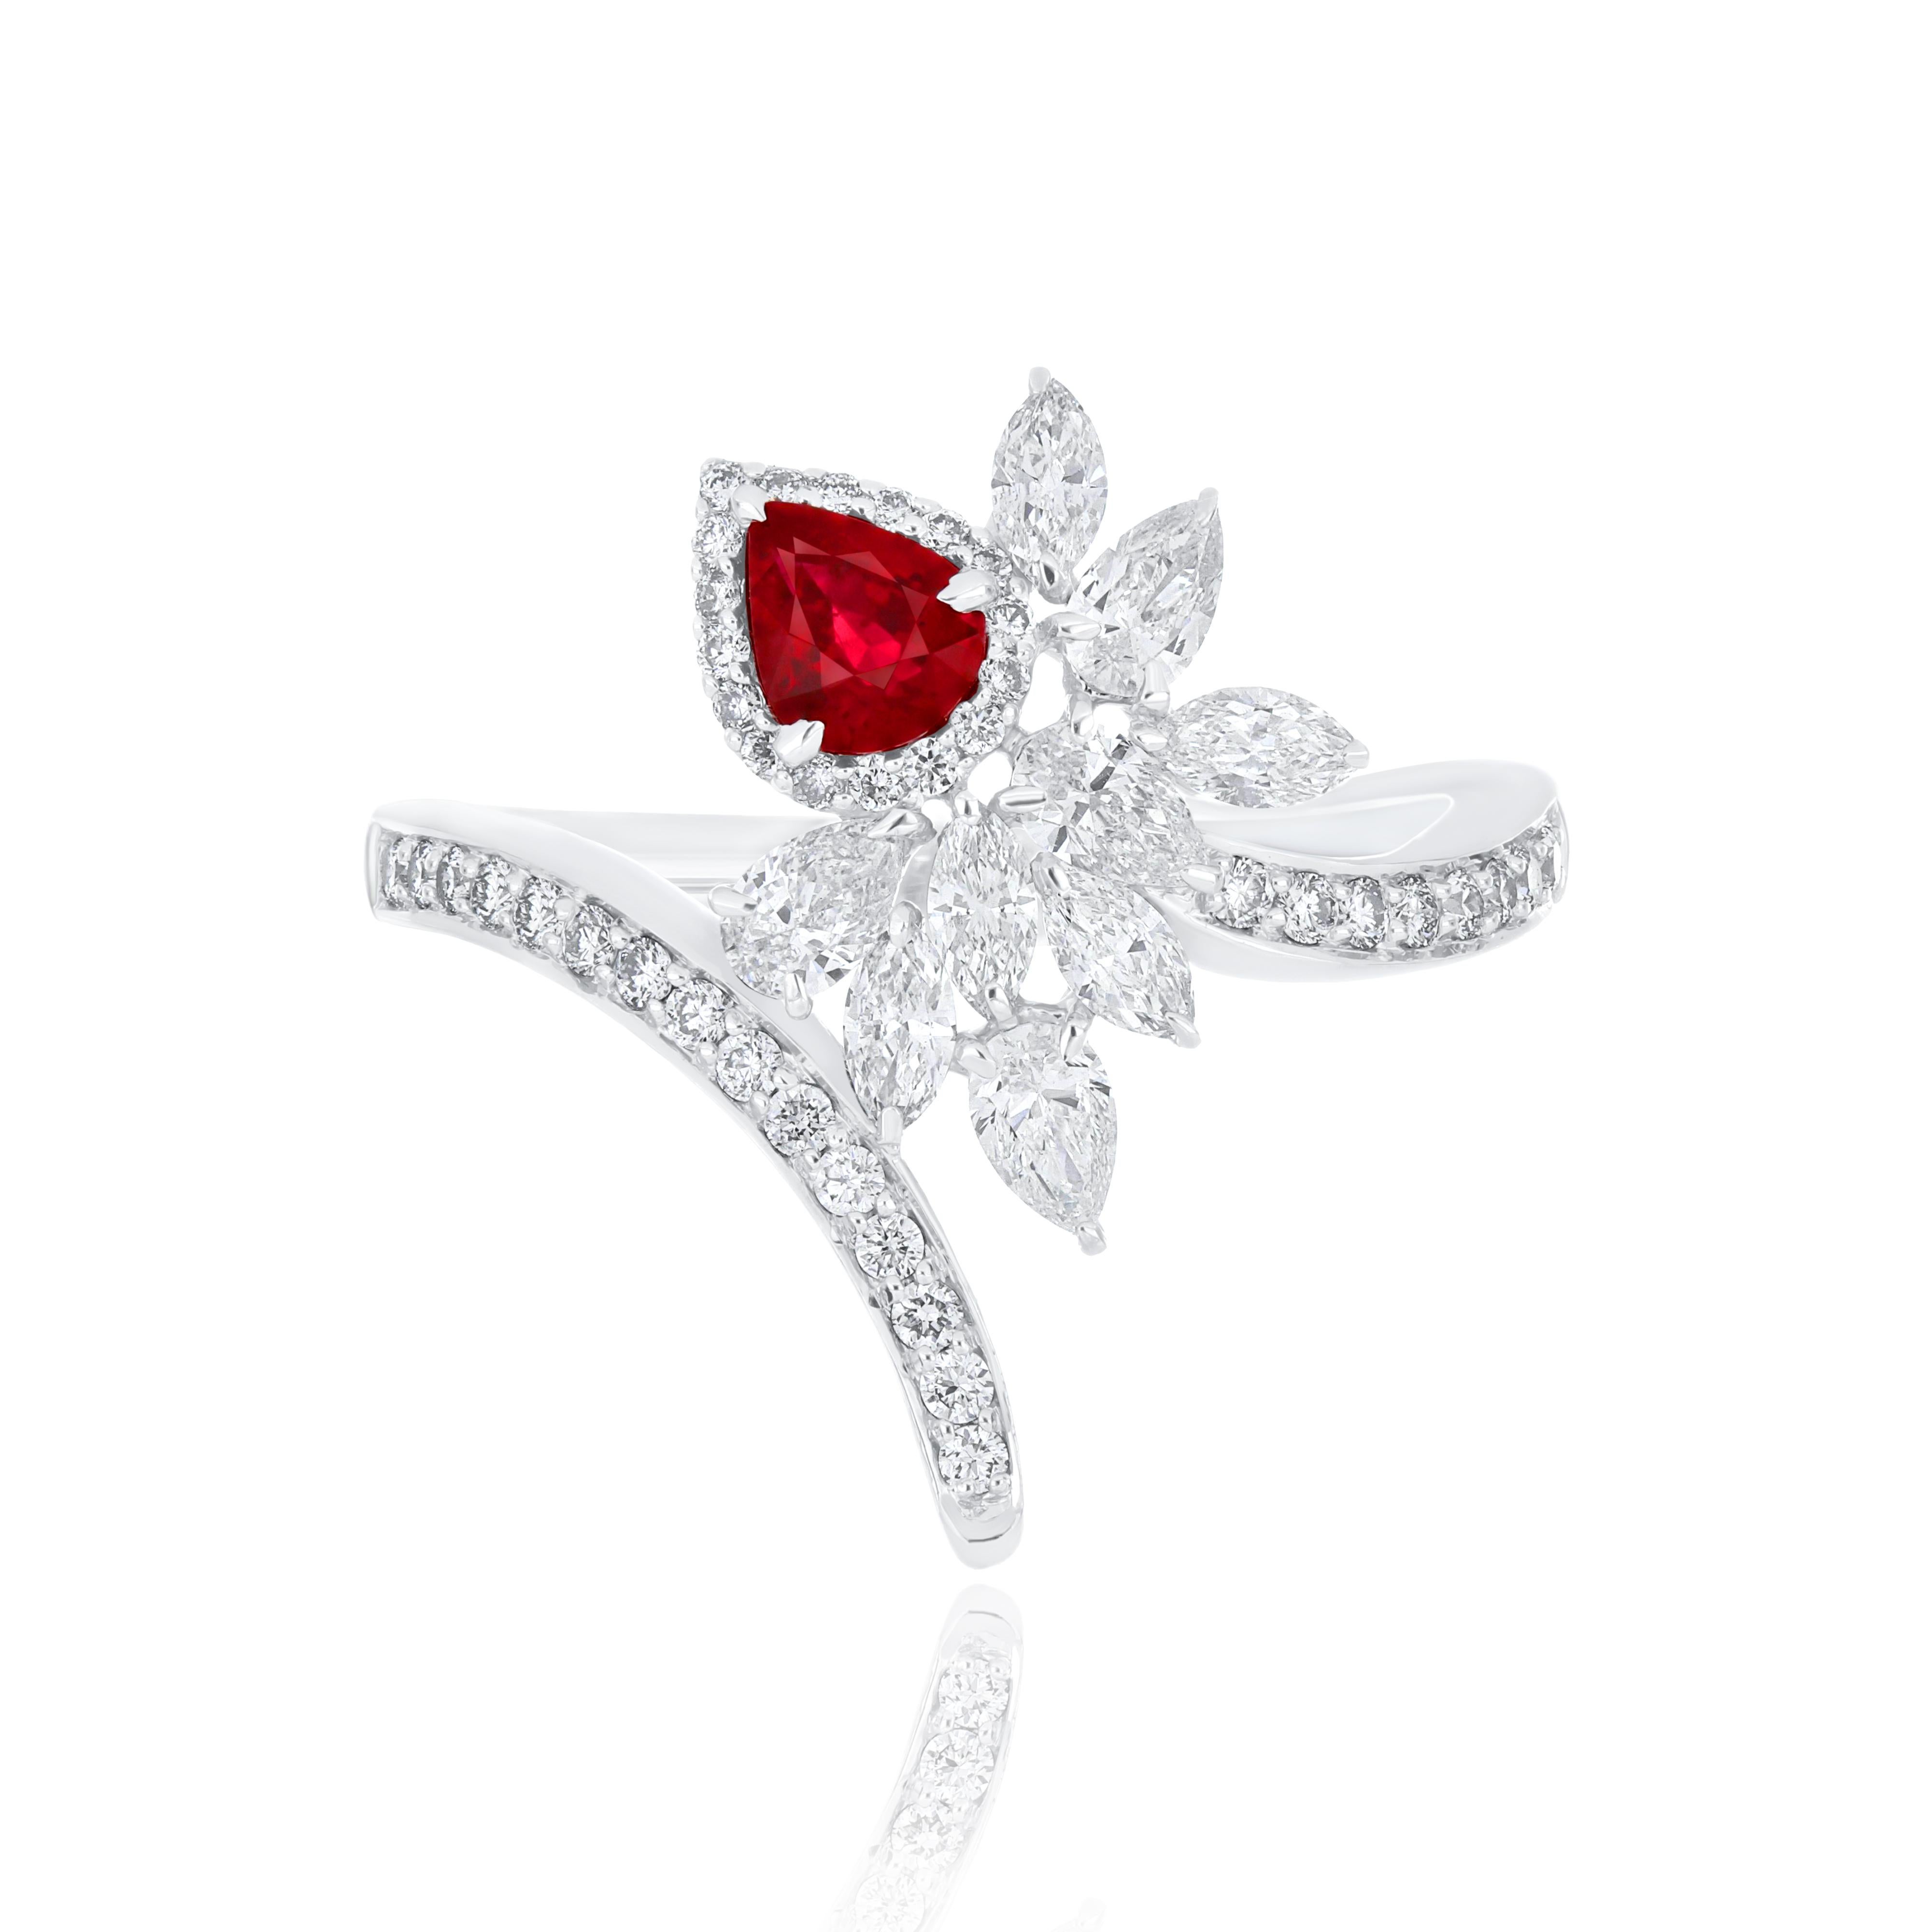 Elegant and exquisitely detailed 18 Karat White Gold Ring, center set with 0.37 Cts .Pear Shape Ruby Mozambique and micro pave set Diamonds, weighing approx. 0.94 Cts Beautifully Hand crafted in 18 Karat White Gold.

Stone Detail:
Ruby Mozambique: